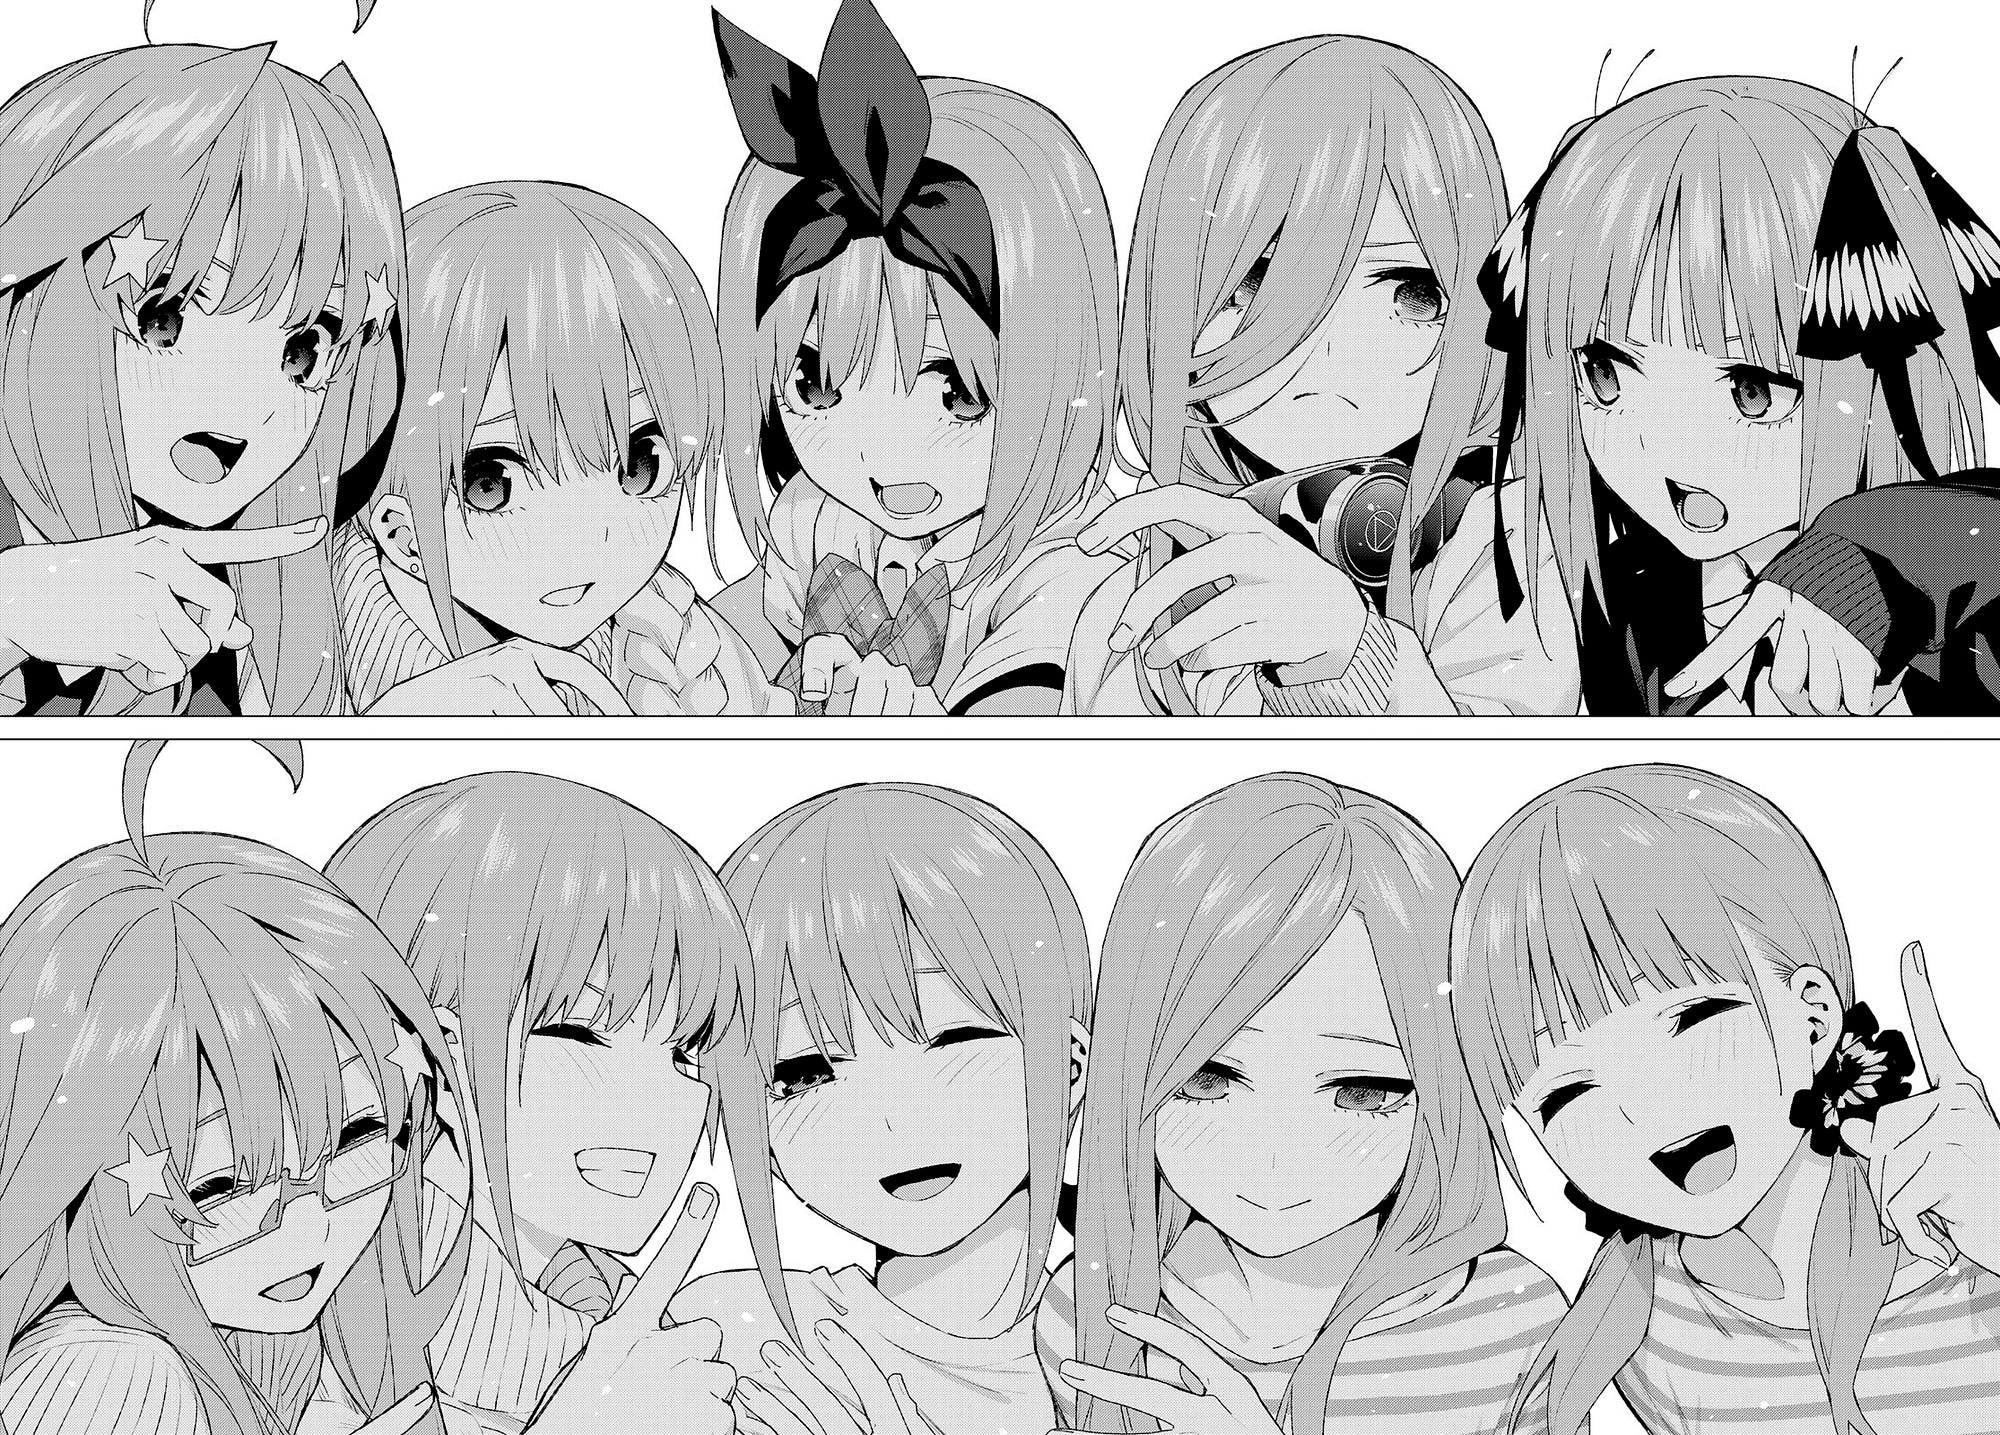 SGcafe on X: The Quintessential Quintuplets manga is ending in 3 more  chapters #QuintessentialQuintuplets #manga #mangaending    / X